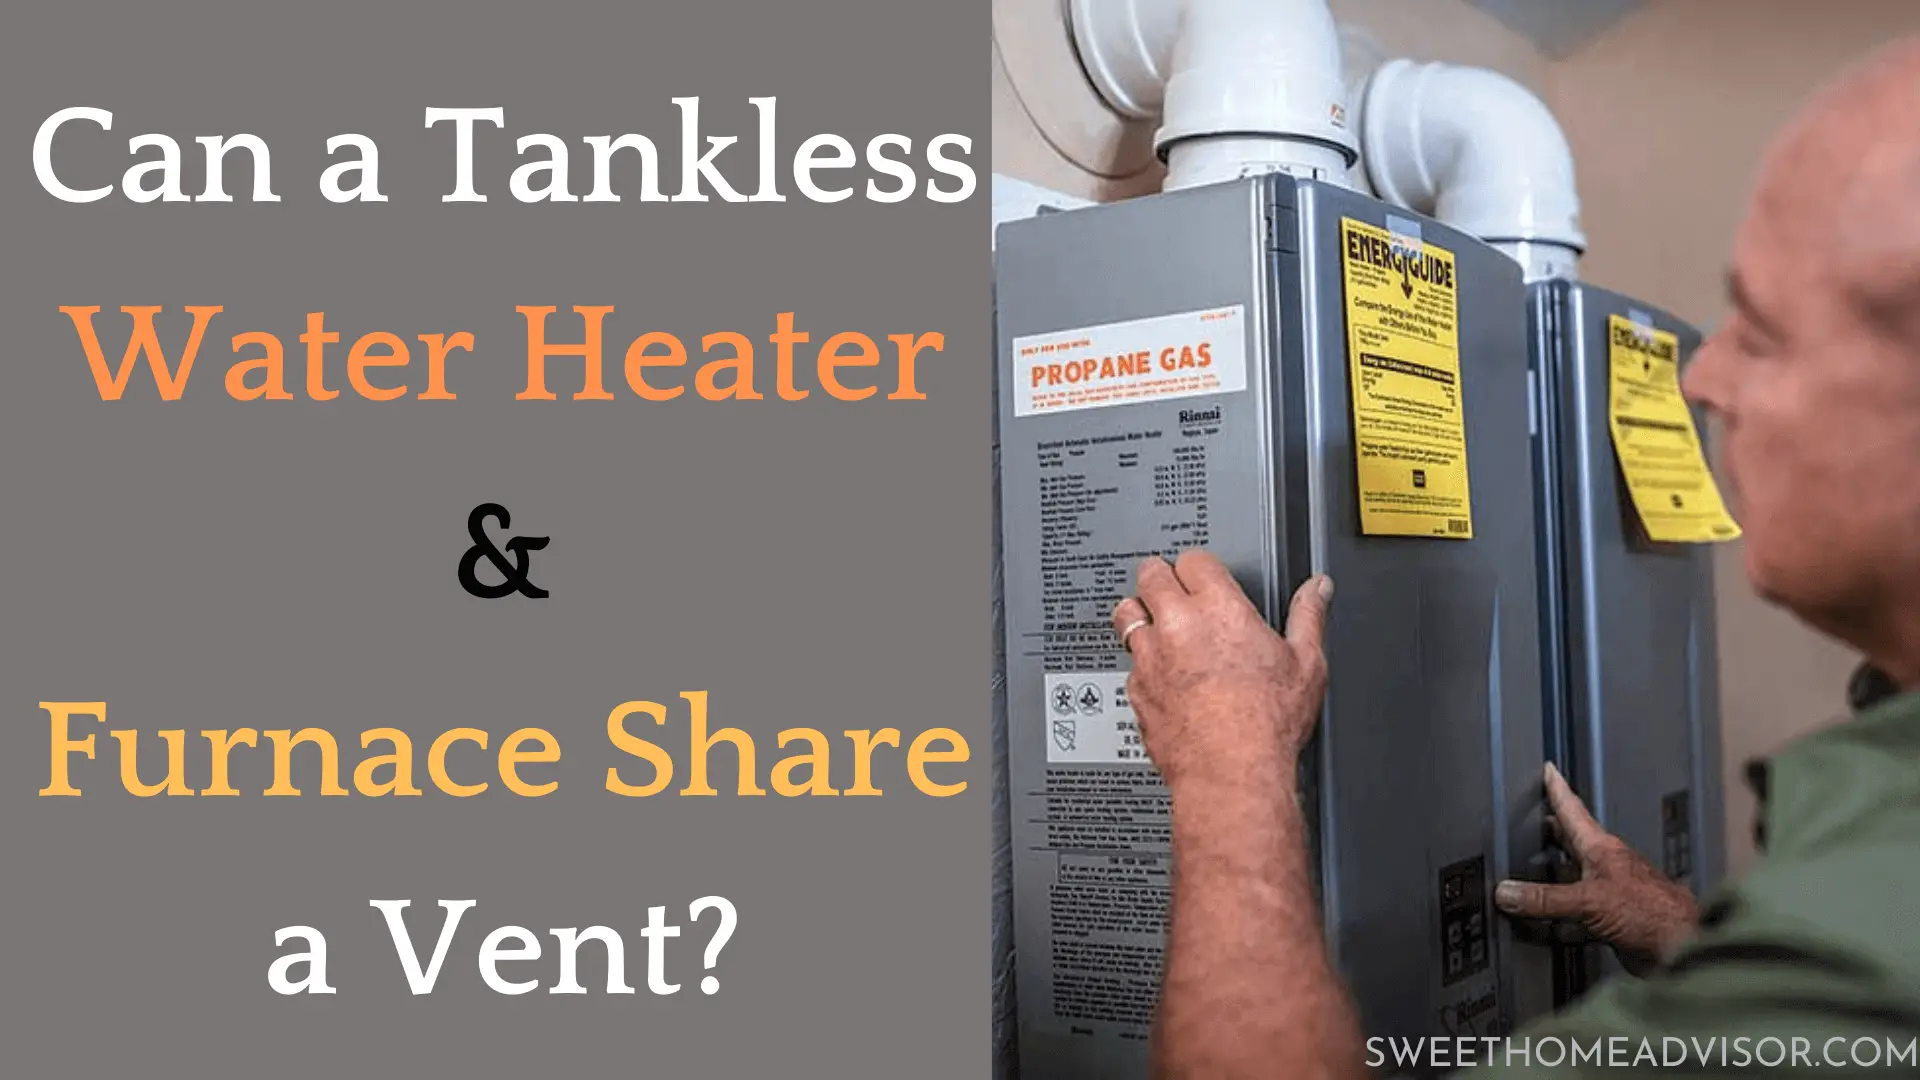 Can a Tankless Water Heater and Furnace Share a Vent